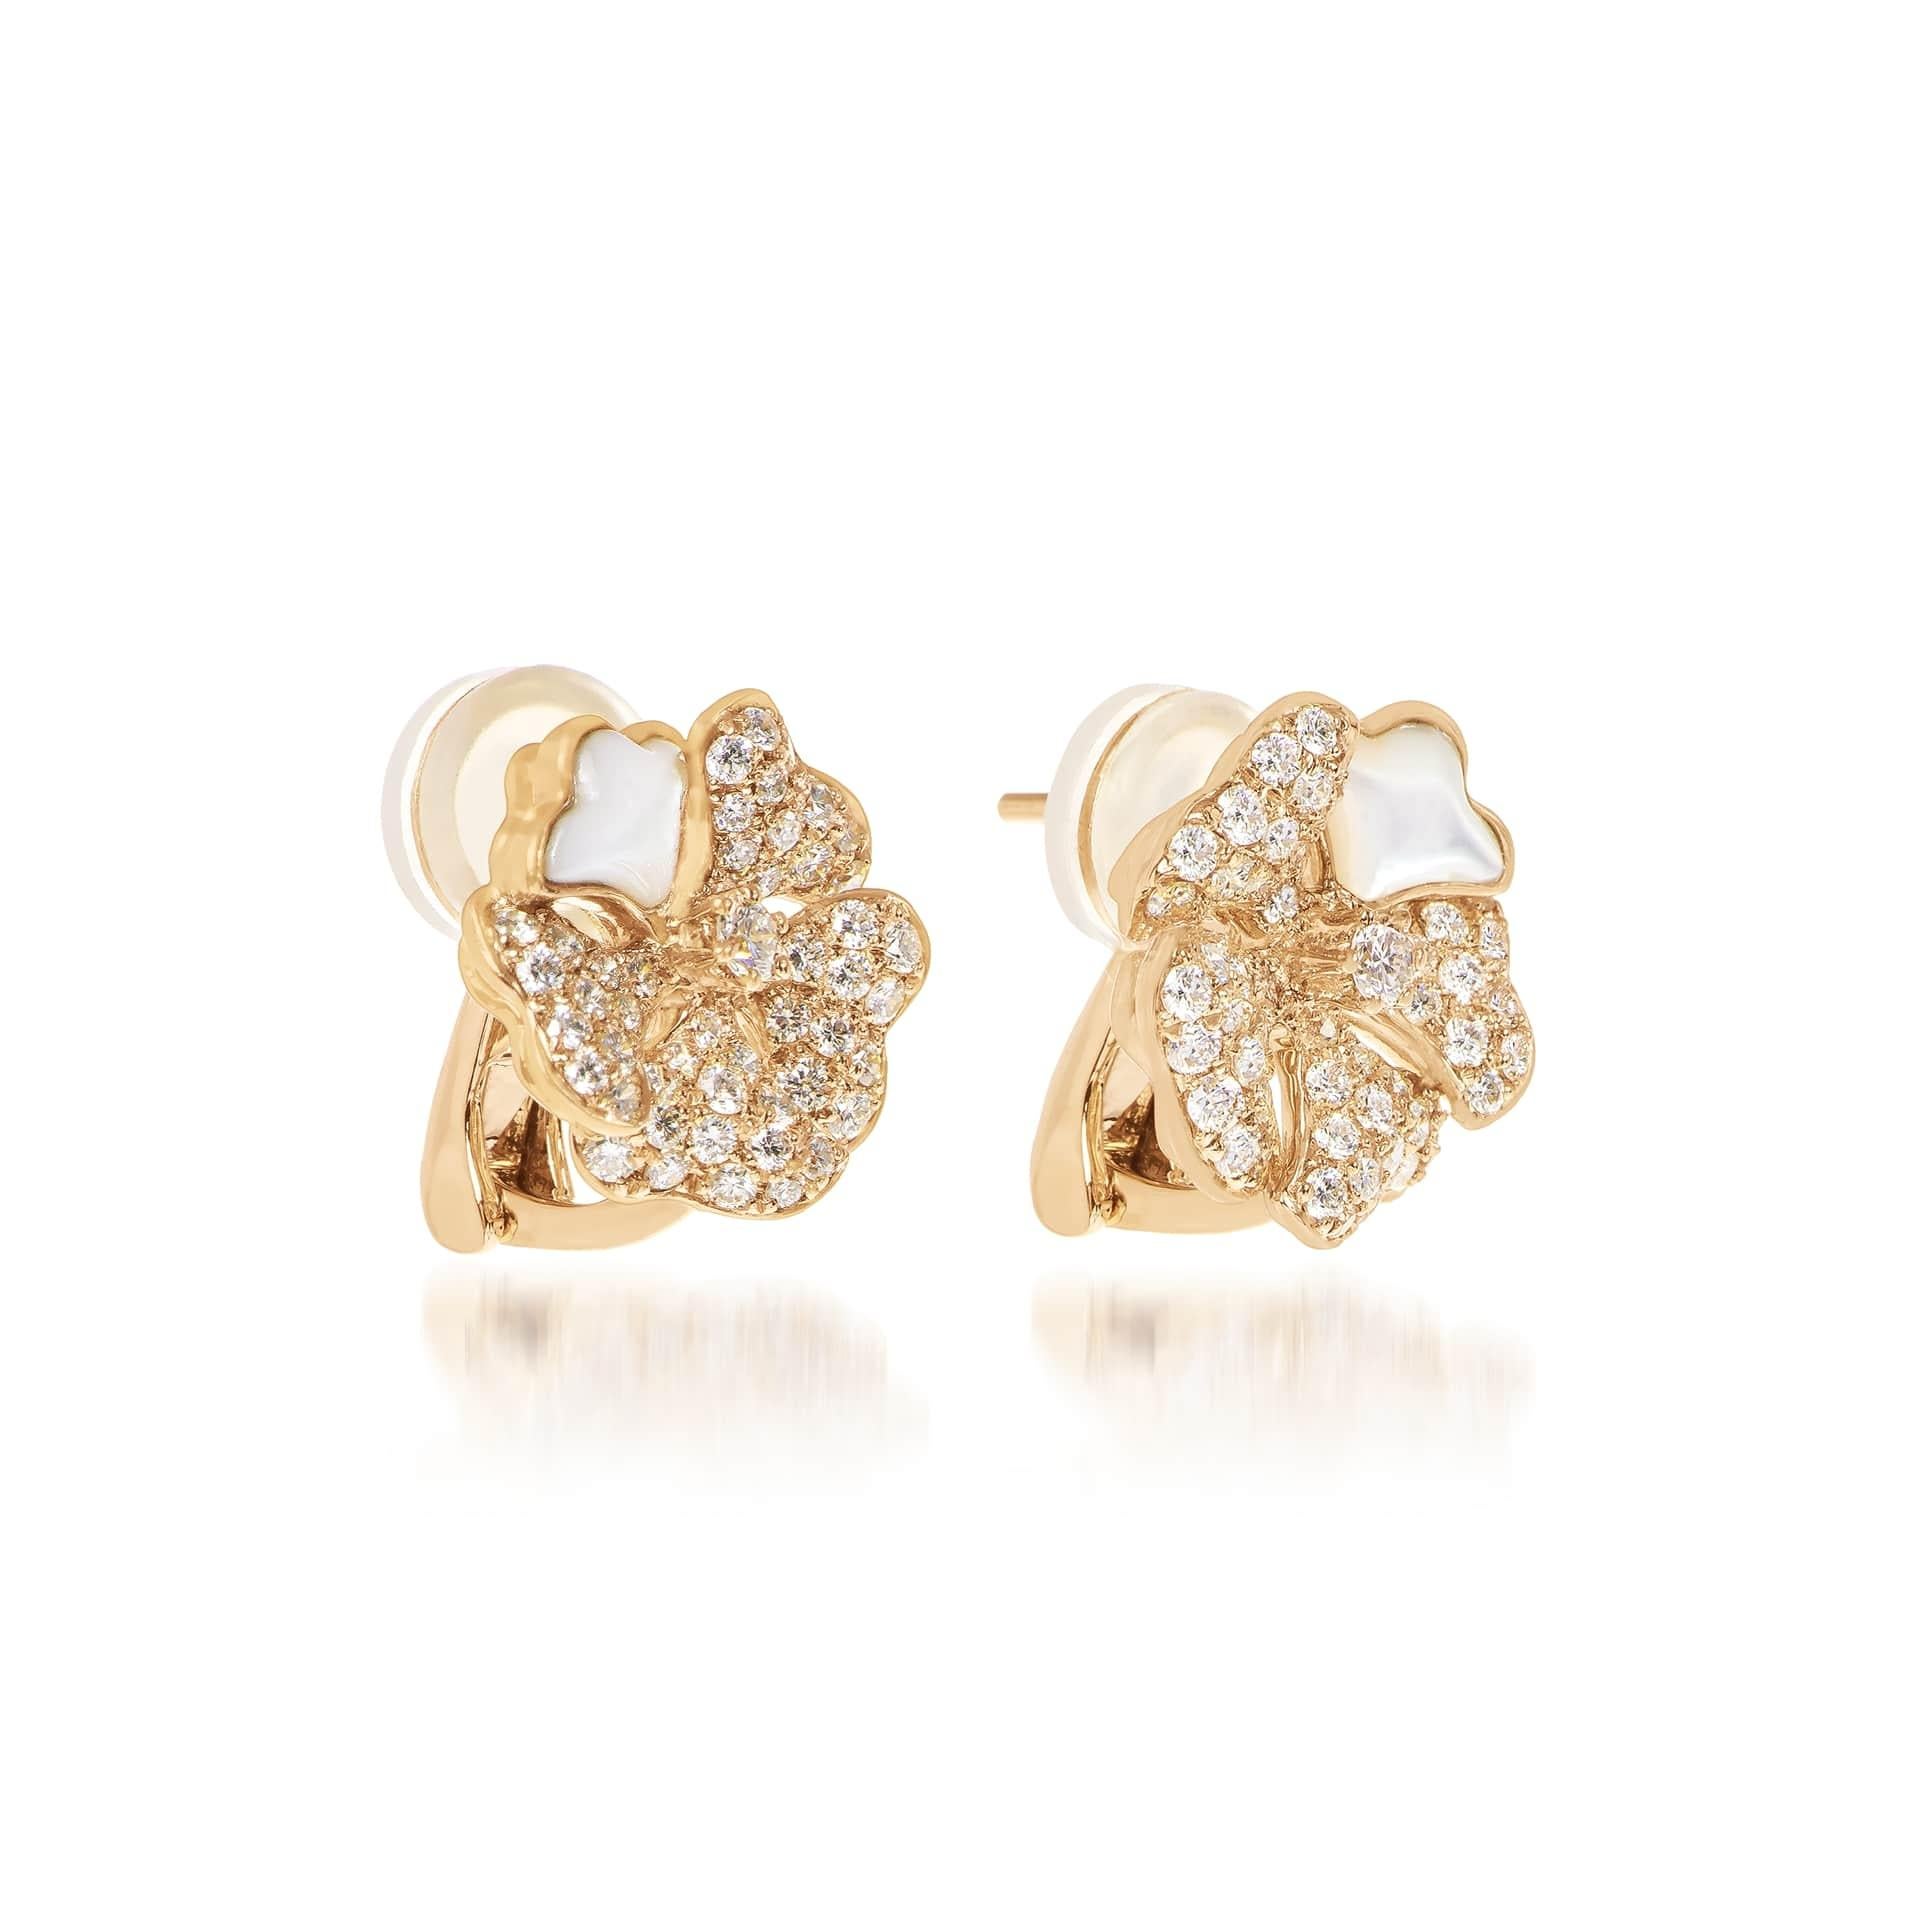 Bloom Diamond and White Mother-of-Pearl Bloom Earring Tops in 18K Rose Gold

Inspired by the exquisite petals of the alpine cinquefoil, the Bloom collection contrasts the richness of diamonds and precious metals with the light versatility of this